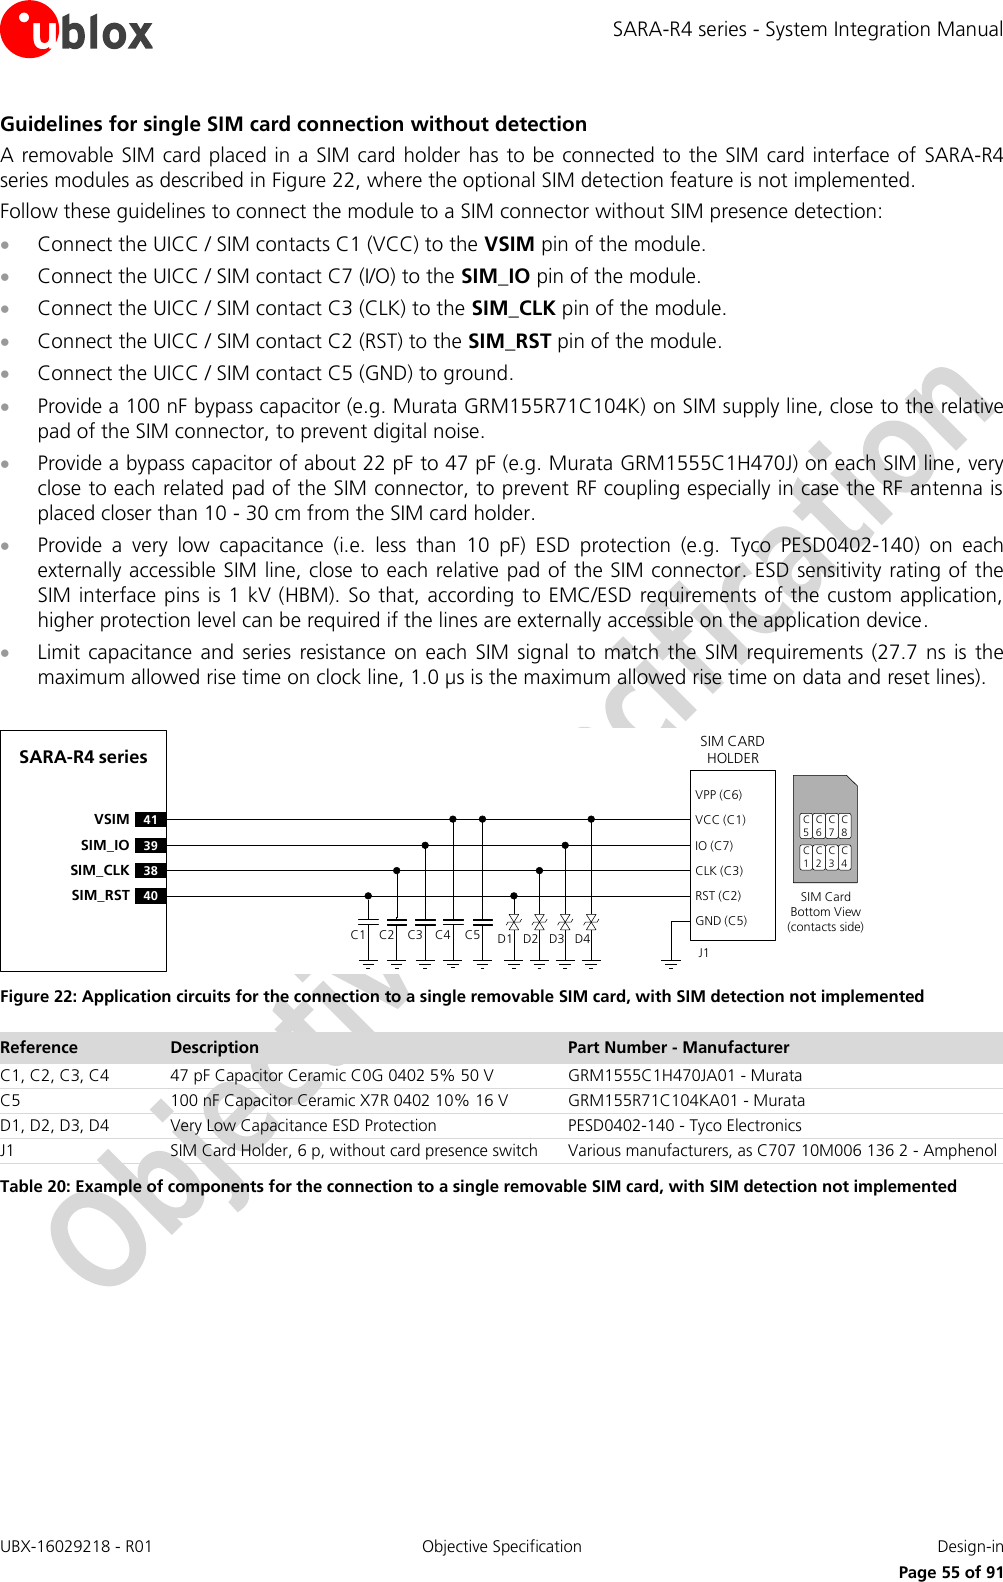 SARA-R4 series - System Integration Manual UBX-16029218 - R01  Objective Specification  Design-in     Page 55 of 91 Guidelines for single SIM card connection without detection A removable SIM card placed in a SIM card holder  has  to be connected to the SIM card interface of SARA-R4 series modules as described in Figure 22, where the optional SIM detection feature is not implemented. Follow these guidelines to connect the module to a SIM connector without SIM presence detection:  Connect the UICC / SIM contacts C1 (VCC) to the VSIM pin of the module.  Connect the UICC / SIM contact C7 (I/O) to the SIM_IO pin of the module.  Connect the UICC / SIM contact C3 (CLK) to the SIM_CLK pin of the module.  Connect the UICC / SIM contact C2 (RST) to the SIM_RST pin of the module.  Connect the UICC / SIM contact C5 (GND) to ground.  Provide a 100 nF bypass capacitor (e.g. Murata GRM155R71C104K) on SIM supply line, close to the relative pad of the SIM connector, to prevent digital noise.  Provide a bypass capacitor of about 22 pF to 47 pF (e.g. Murata GRM1555C1H470J) on each SIM line, very close to each related pad of the SIM connector, to prevent RF coupling especially in case the RF antenna is placed closer than 10 - 30 cm from the SIM card holder.  Provide  a  very  low  capacitance  (i.e.  less  than  10  pF)  ESD  protection  (e.g.  Tyco  PESD0402-140)  on  each externally accessible SIM line, close to each relative pad of the SIM connector. ESD sensitivity rating of the SIM interface pins is 1 kV (HBM). So that, according to EMC/ESD requirements of the custom application, higher protection level can be required if the lines are externally accessible on the application device.  Limit capacitance  and  series resistance  on each  SIM  signal  to  match the  SIM requirements  (27.7  ns  is the maximum allowed rise time on clock line, 1.0 µs is the maximum allowed rise time on data and reset lines).  SARA-R4 series41VSIM39SIM_IO38SIM_CLK40SIM_RSTSIM CARD HOLDERC5C6C7C1C2C3SIM Card Bottom View (contacts side)C1VPP (C6)VCC (C1)IO (C7)CLK (C3)RST (C2)GND (C5)C2 C3 C5J1C4 D1 D2 D3 D4C8C4 Figure 22: Application circuits for the connection to a single removable SIM card, with SIM detection not implemented Reference Description Part Number - Manufacturer C1, C2, C3, C4 47 pF Capacitor Ceramic C0G 0402 5% 50 V GRM1555C1H470JA01 - Murata C5 100 nF Capacitor Ceramic X7R 0402 10% 16 V GRM155R71C104KA01 - Murata D1, D2, D3, D4 Very Low Capacitance ESD Protection PESD0402-140 - Tyco Electronics  J1 SIM Card Holder, 6 p, without card presence switch Various manufacturers, as C707 10M006 136 2 - Amphenol Table 20: Example of components for the connection to a single removable SIM card, with SIM detection not implemented  